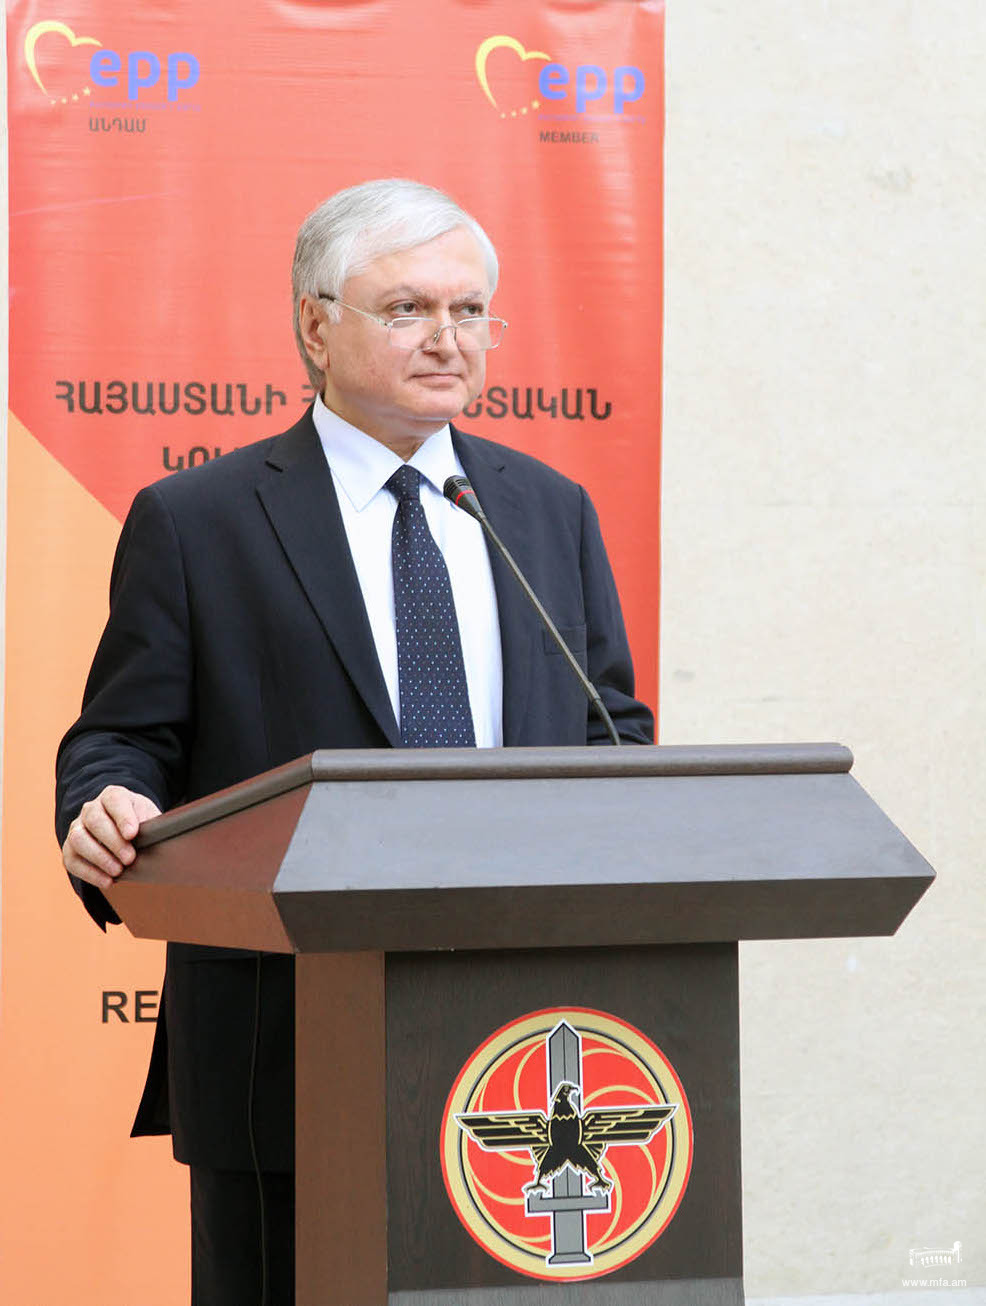 Speech by Minister Edward Nalbandian at the event dedicated to the 40th anniversary of the EPP